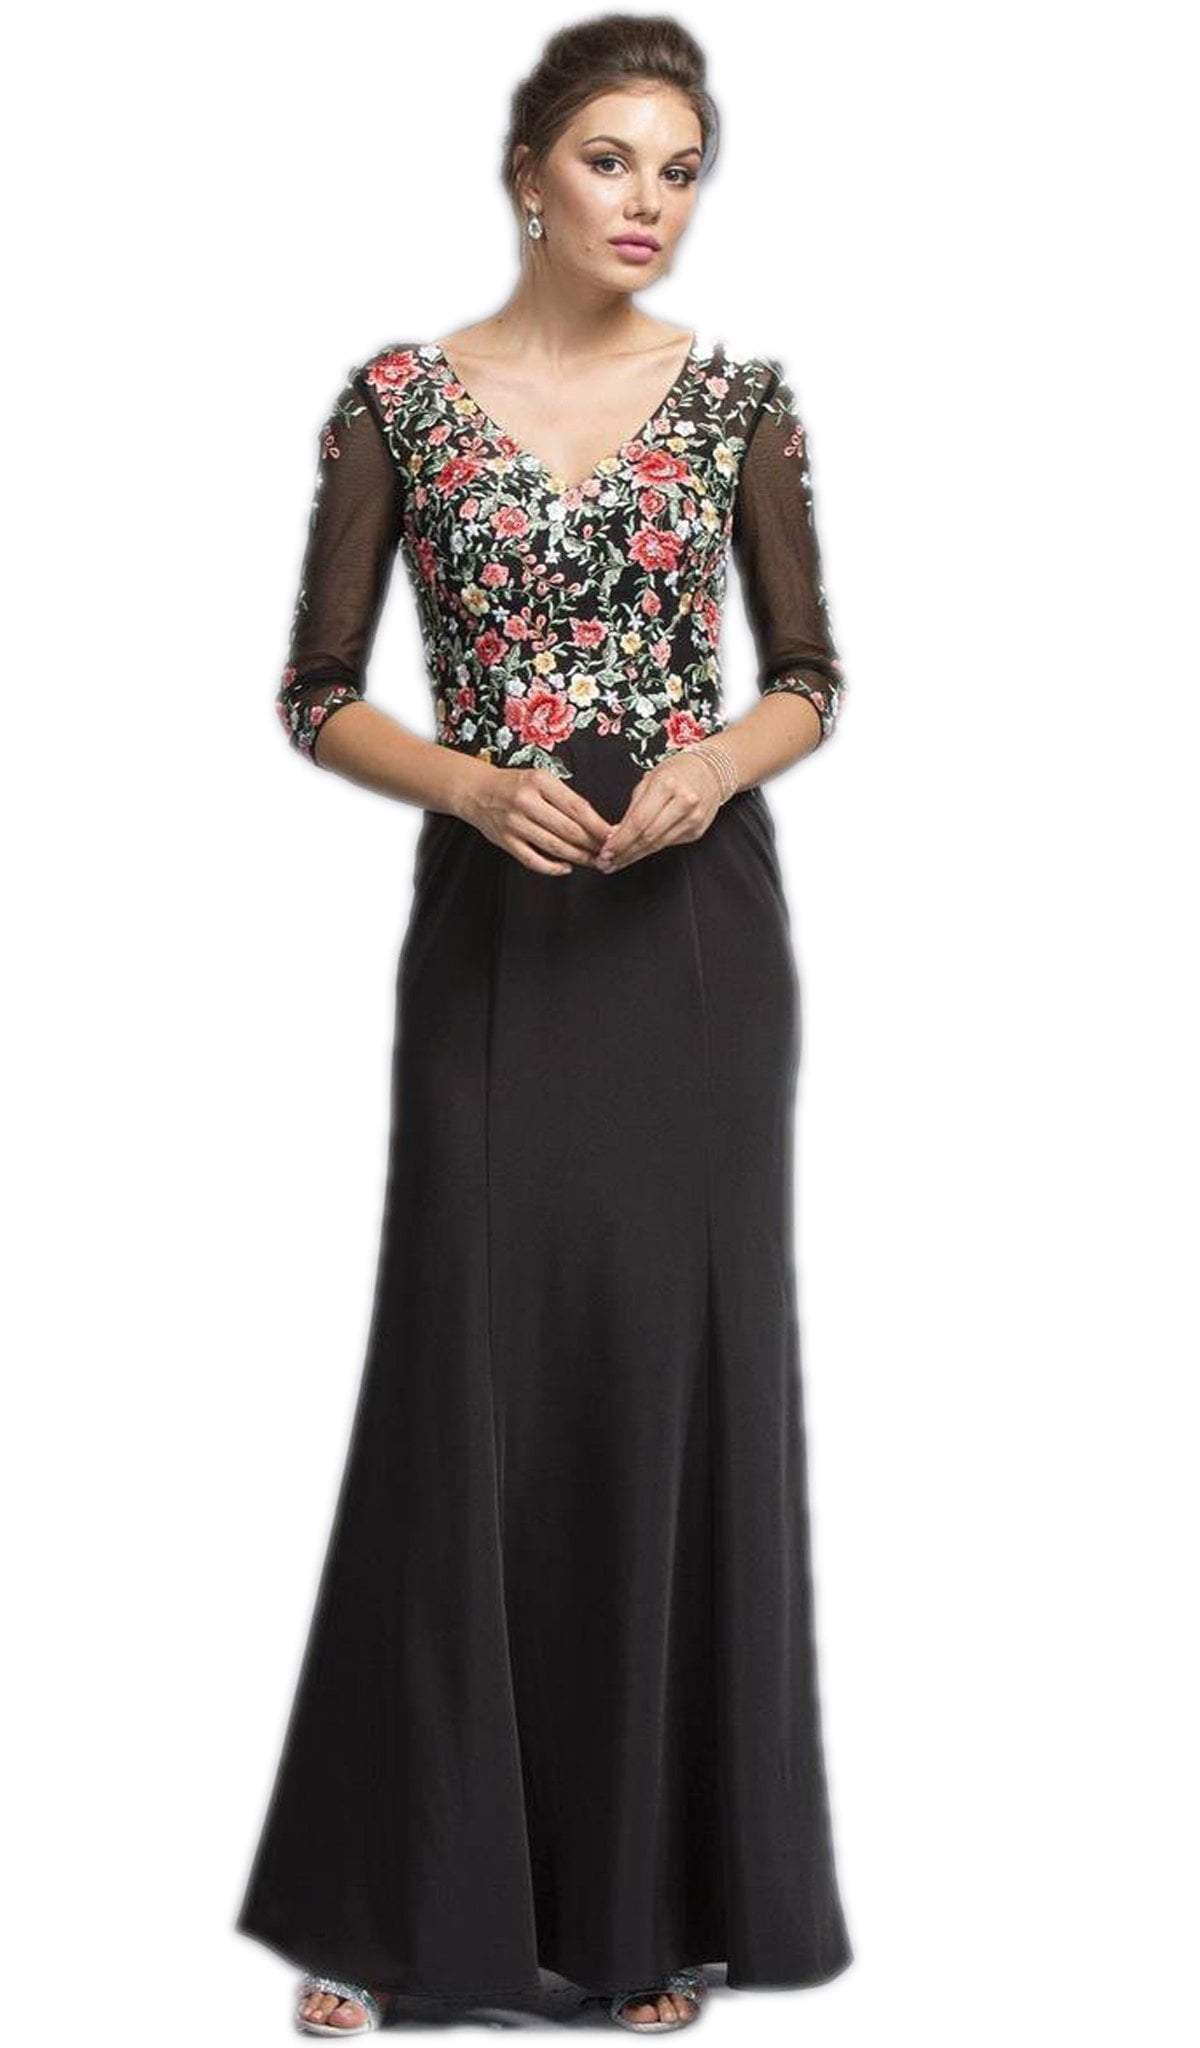 Floral Embroided Mother of Bride Dress Dress XXS / Black